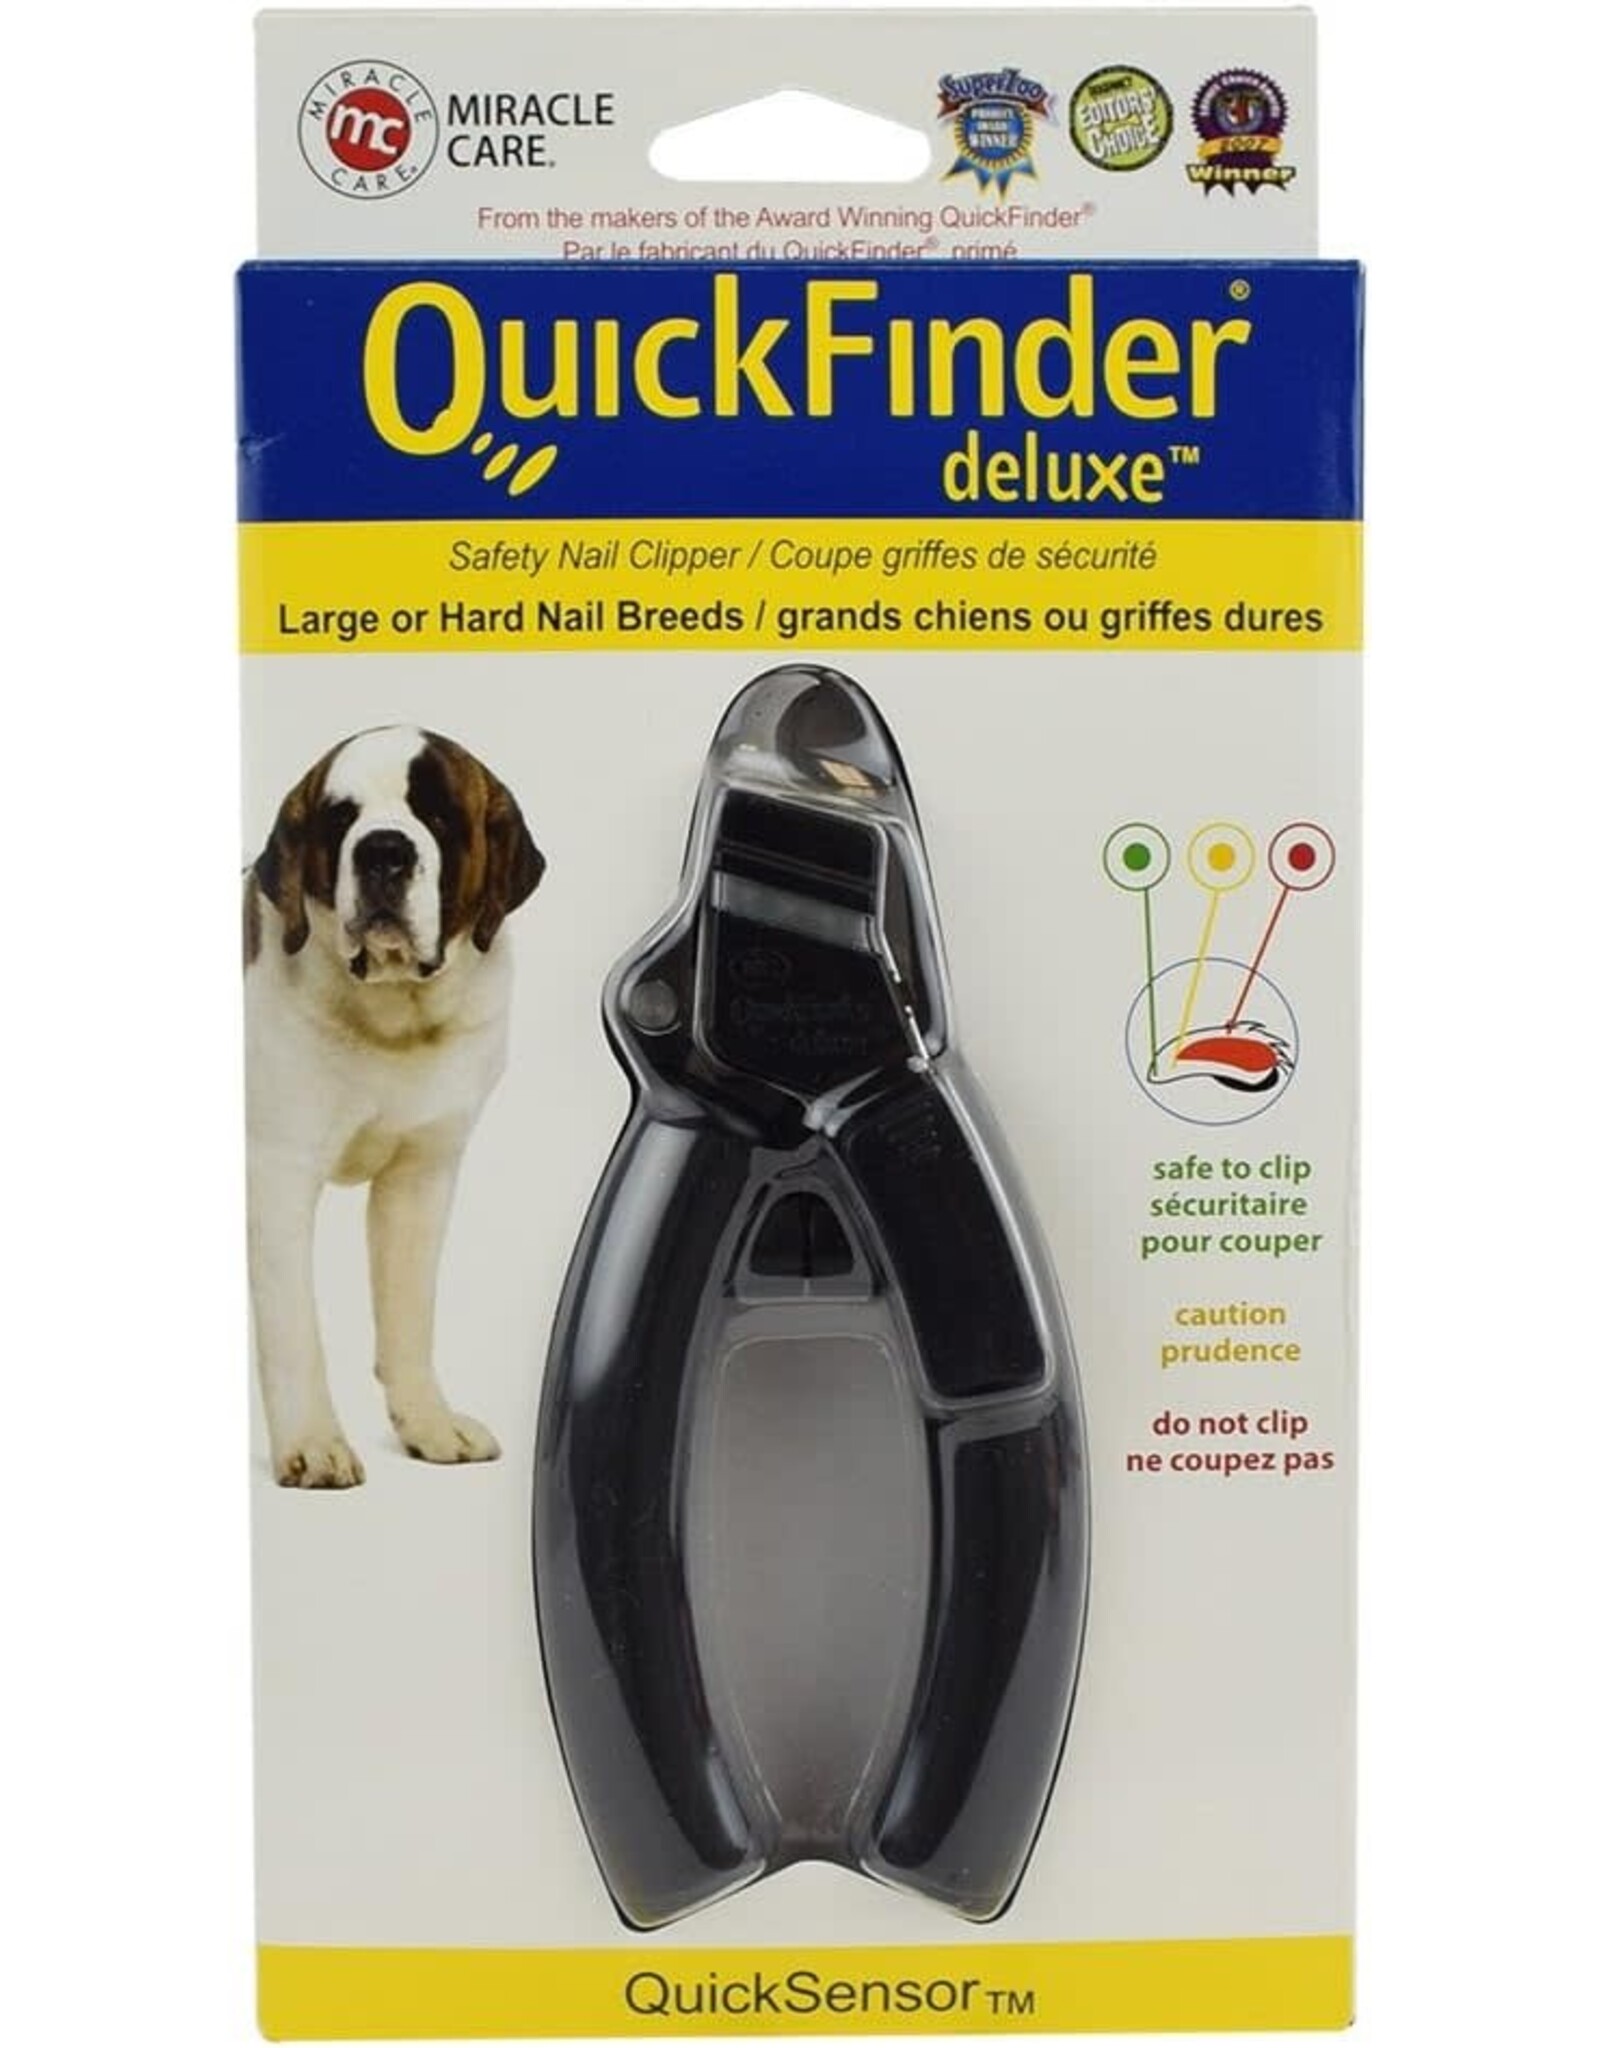 MIRACLE CARE MIRACLE CARE QUICK FINDER DELUX